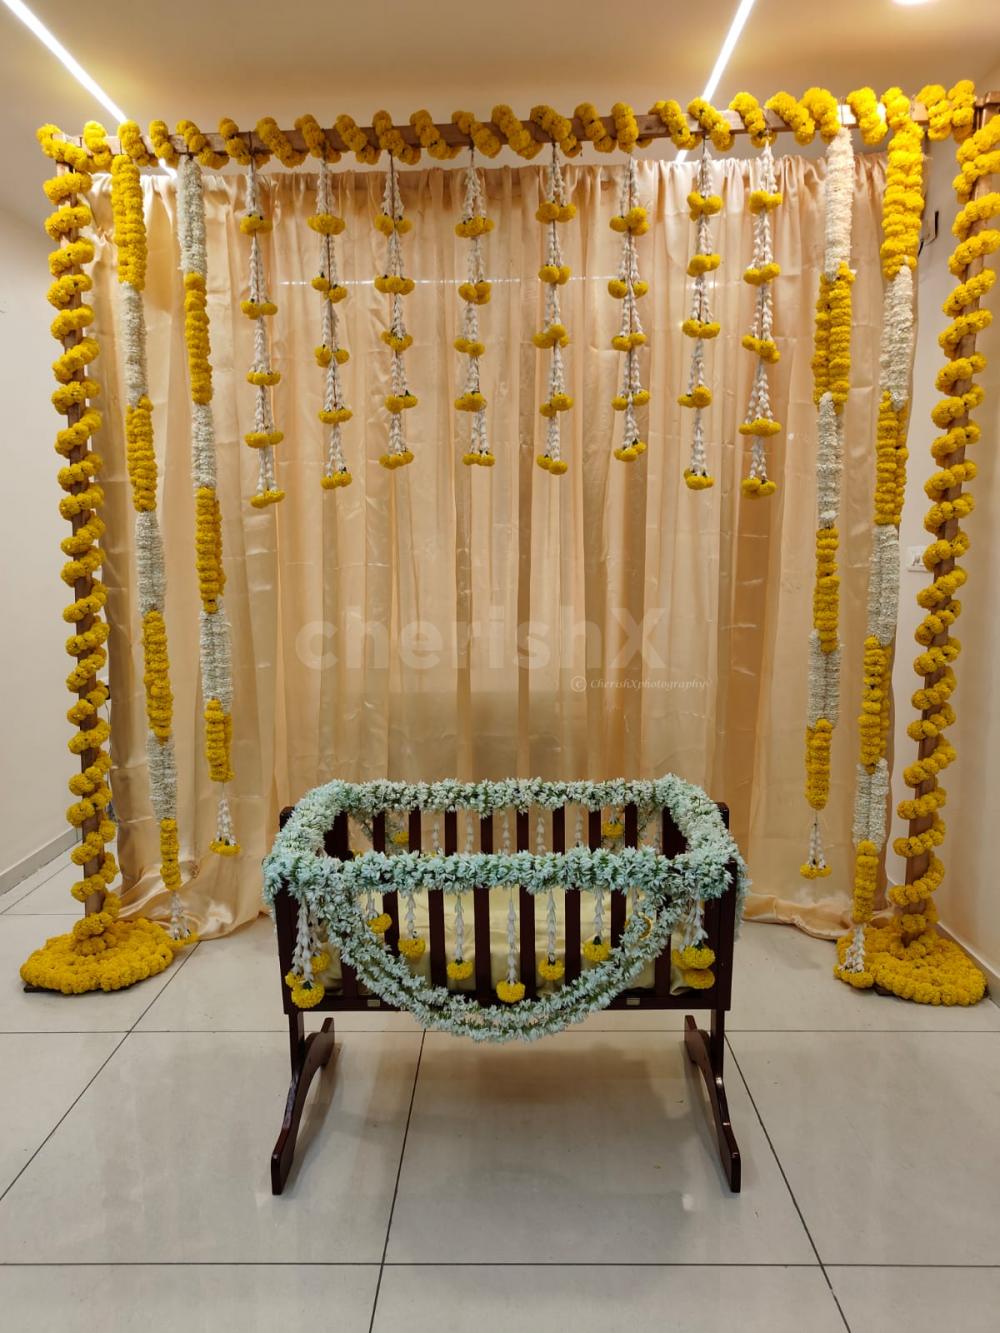 A gold-coloured backdrop adorned with 11 rows of marigold yellow and lily flowers, creates a captivating and visually striking centrepiece.